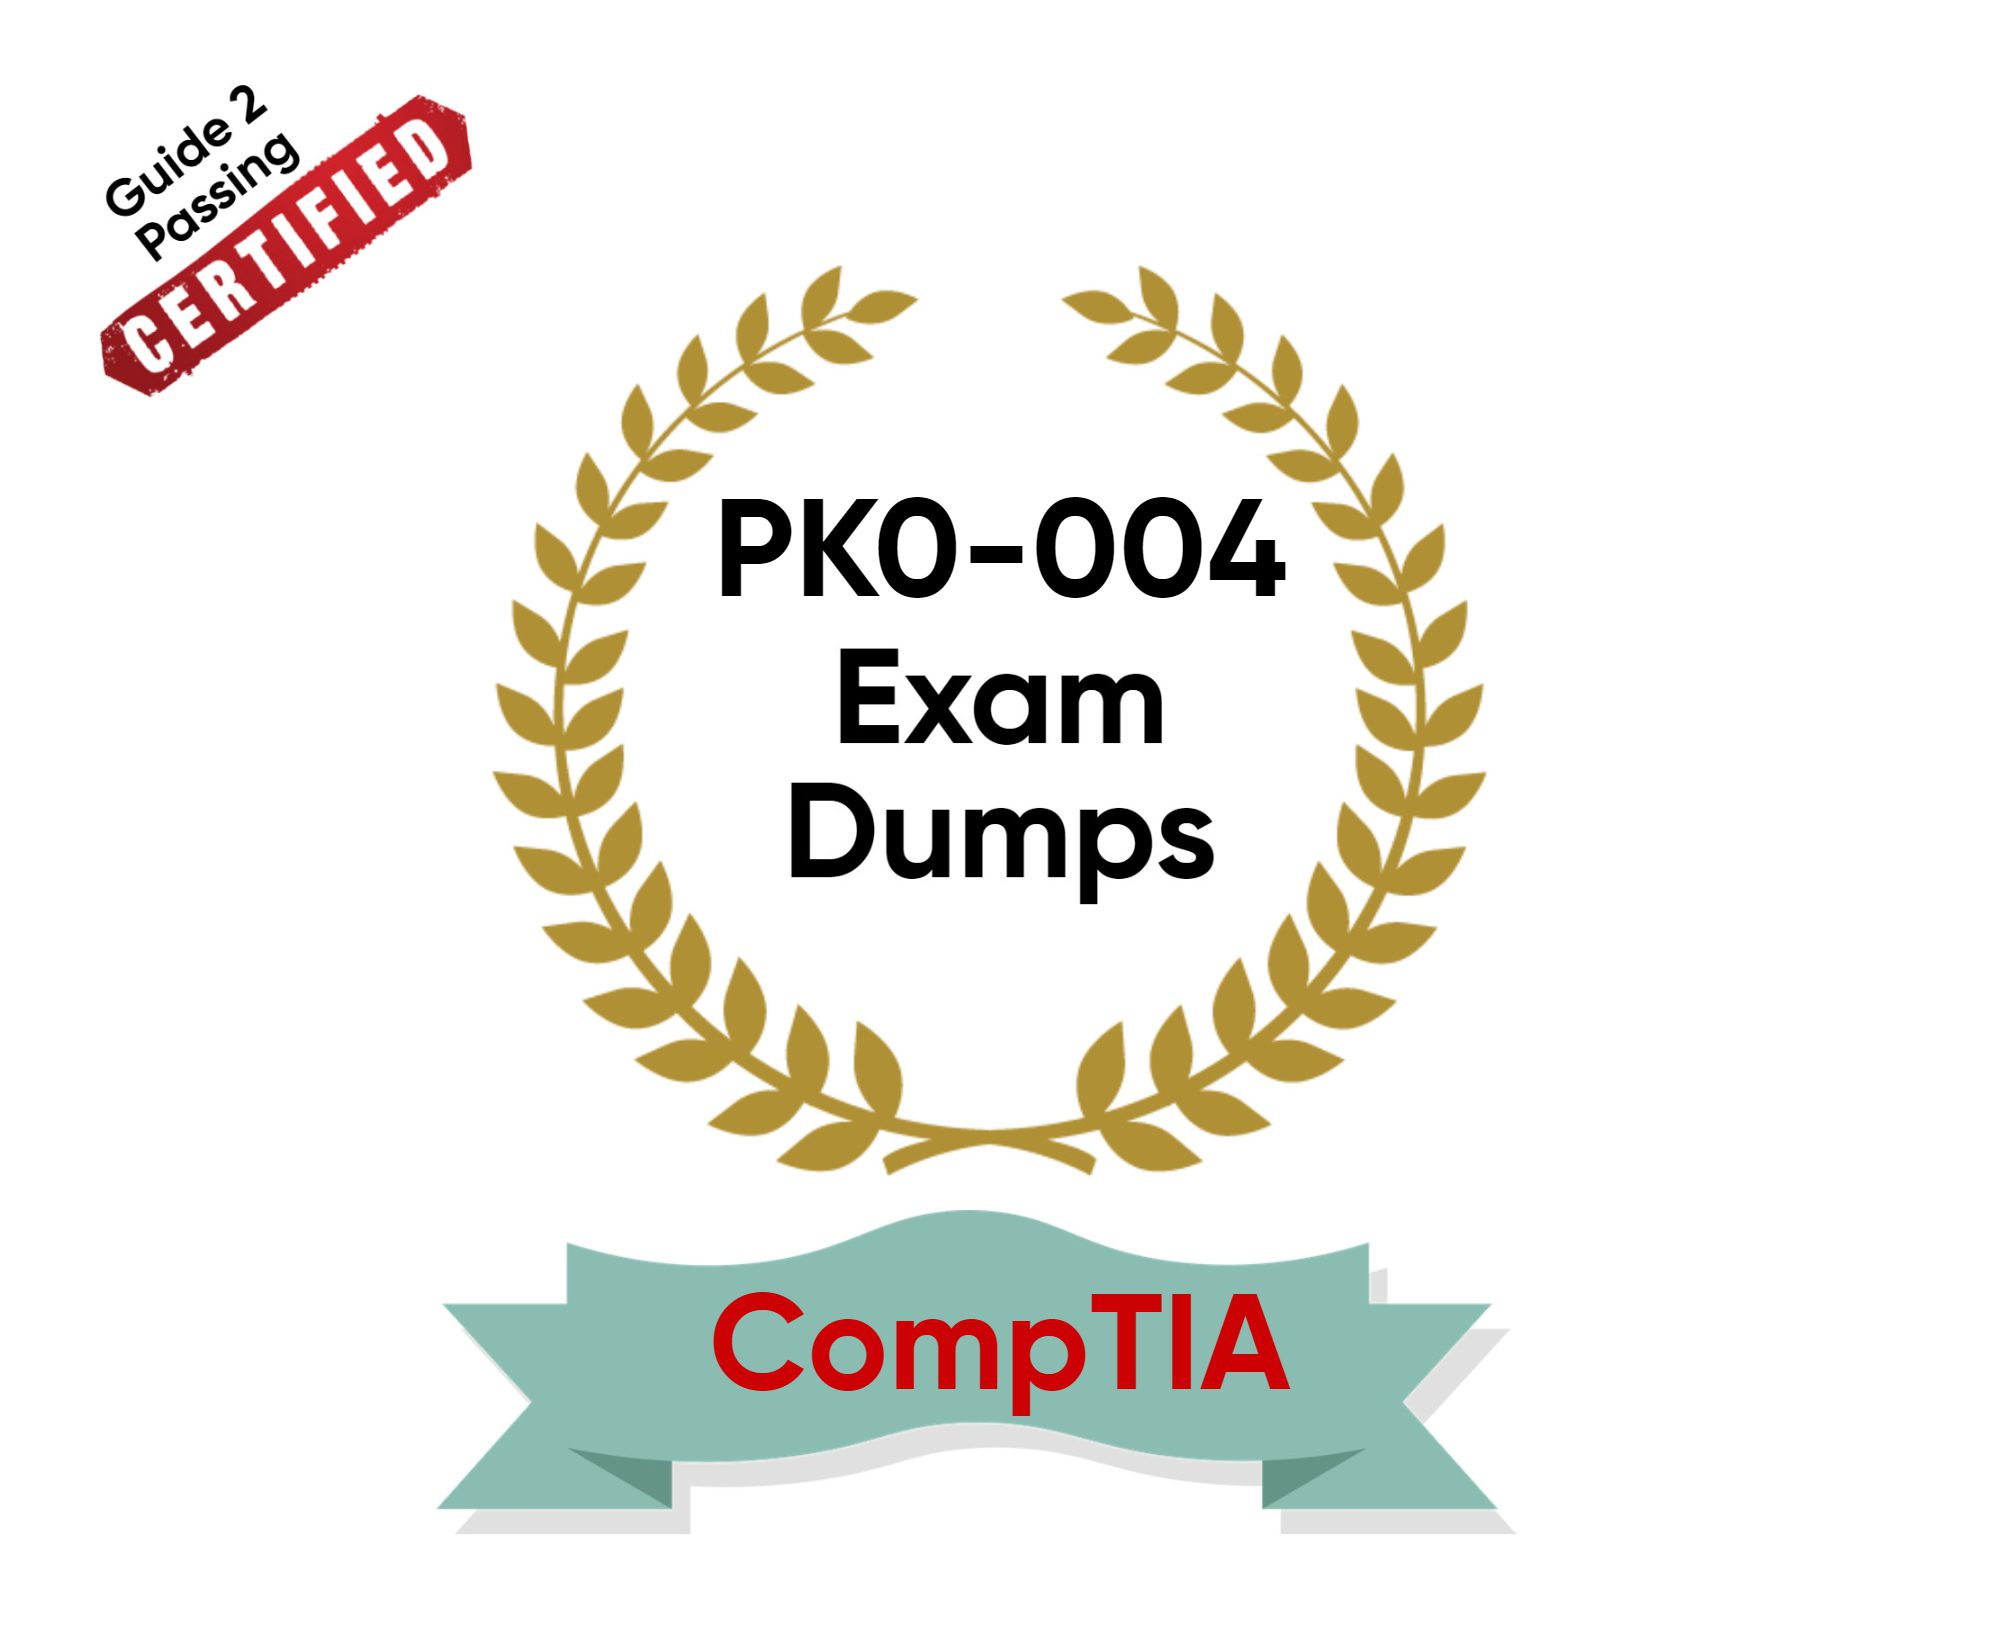 Pass Your CompTIA PK0-004 Exam Dumps From Guide 2 Passing